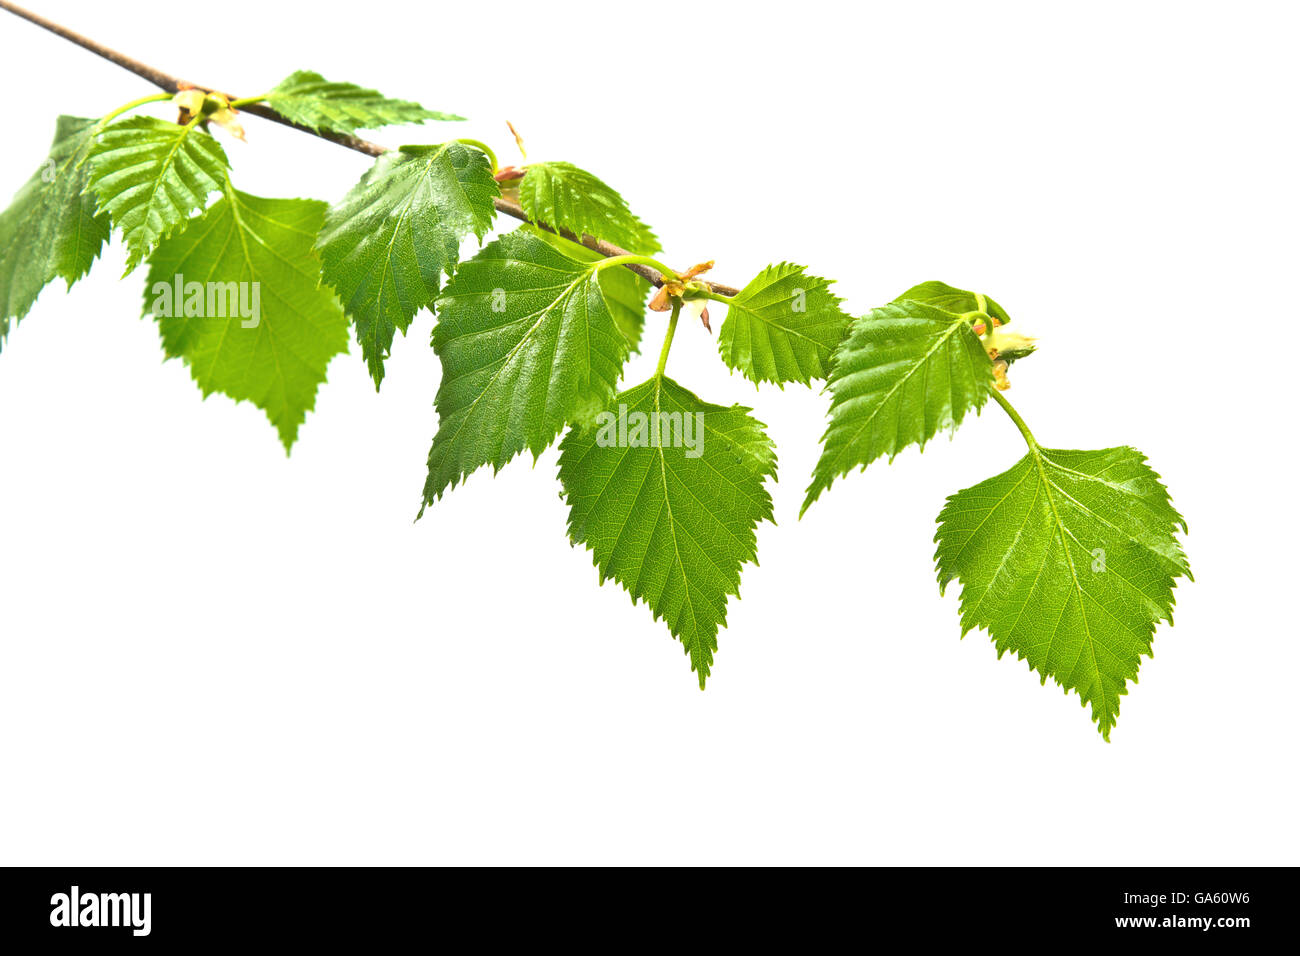 Birch branch with leafs on white background Stock Photo